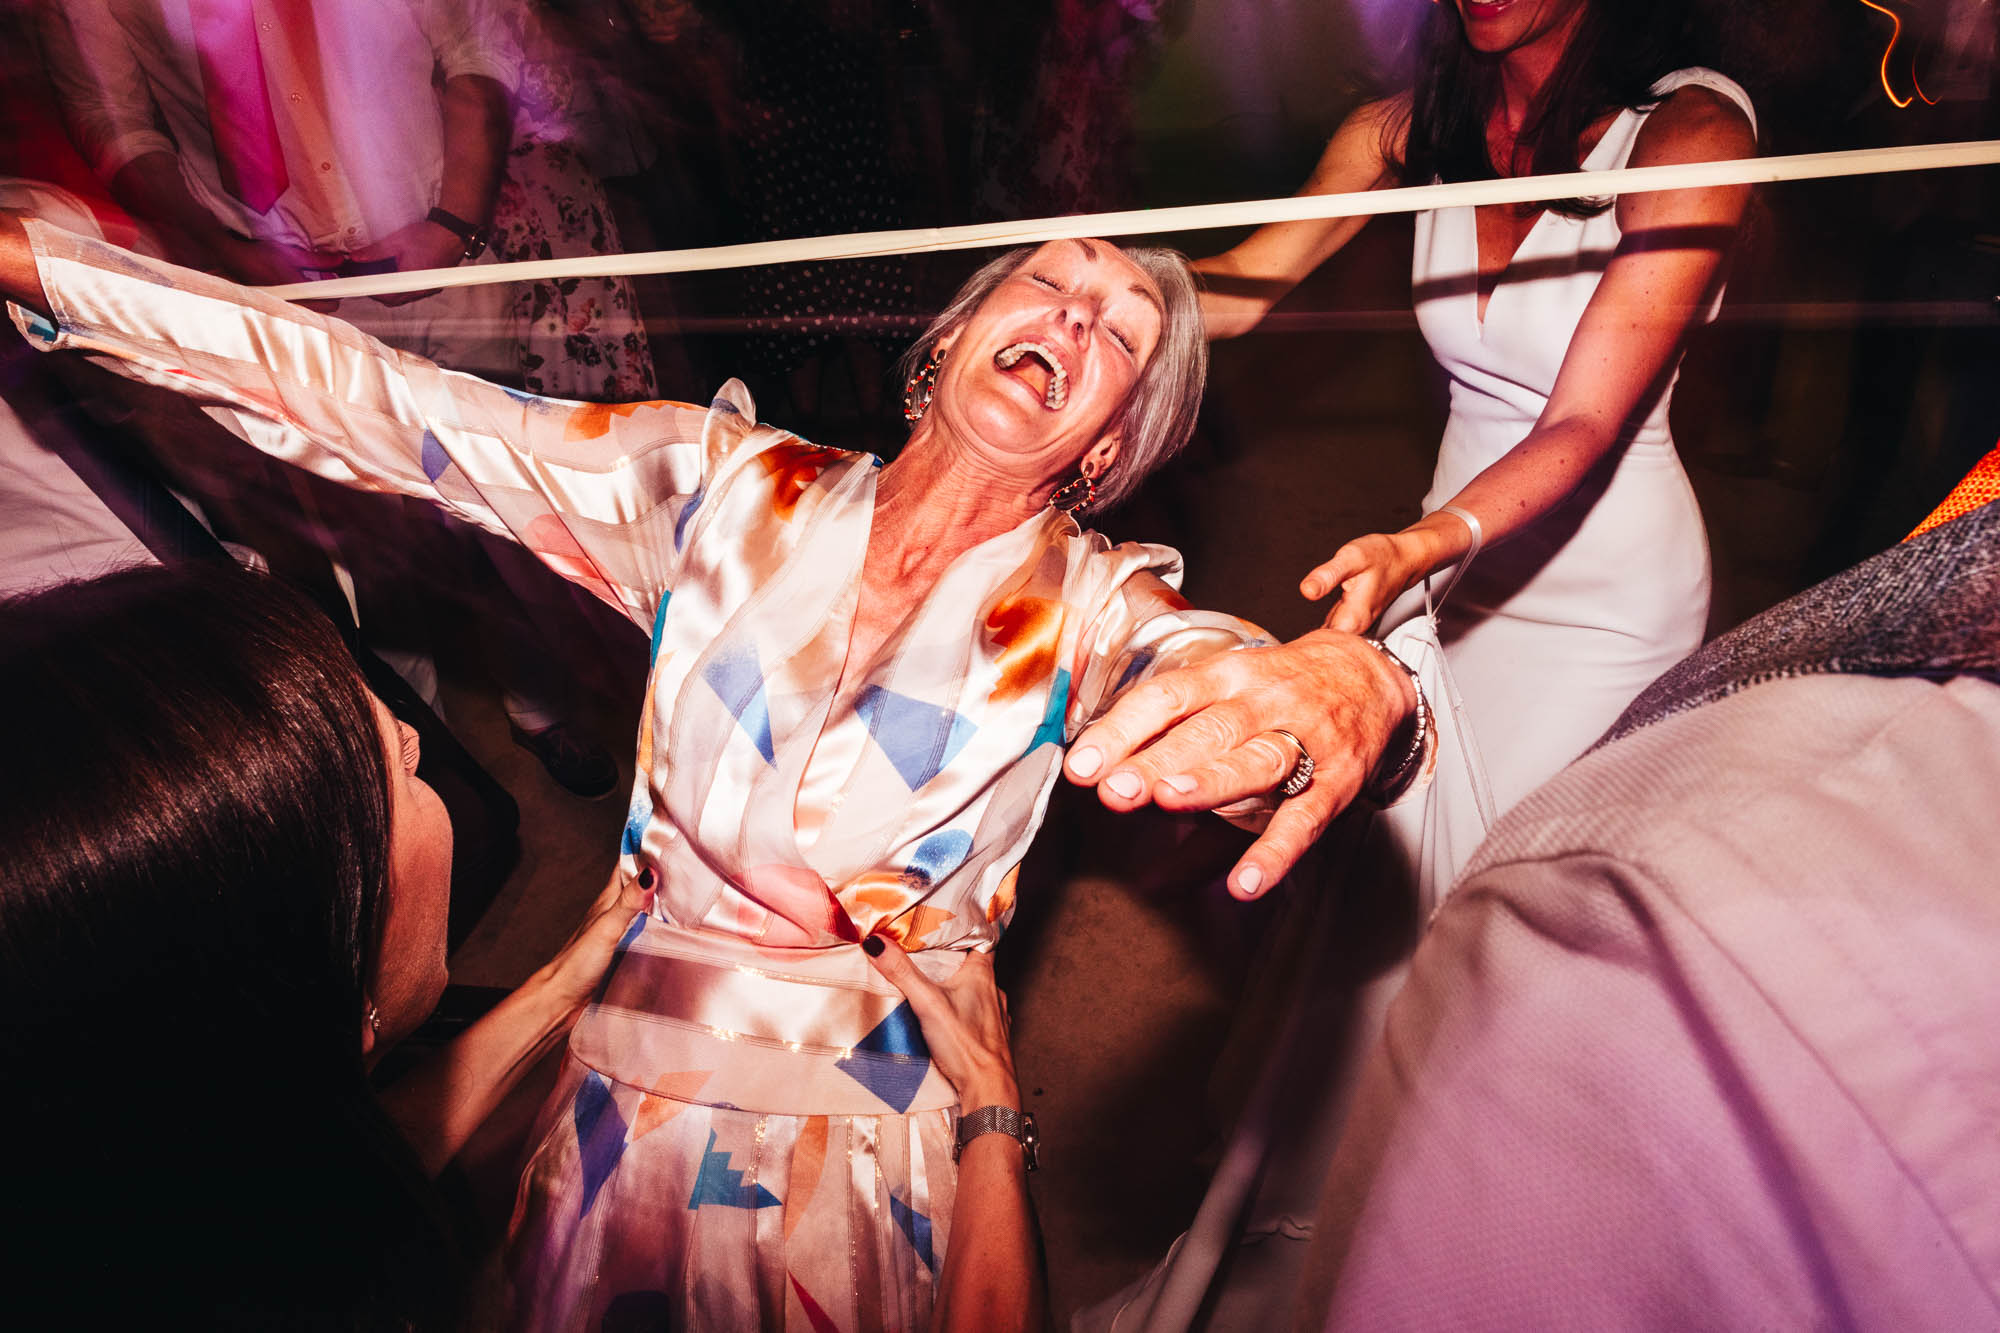 mother of the bride doing the limbo dance